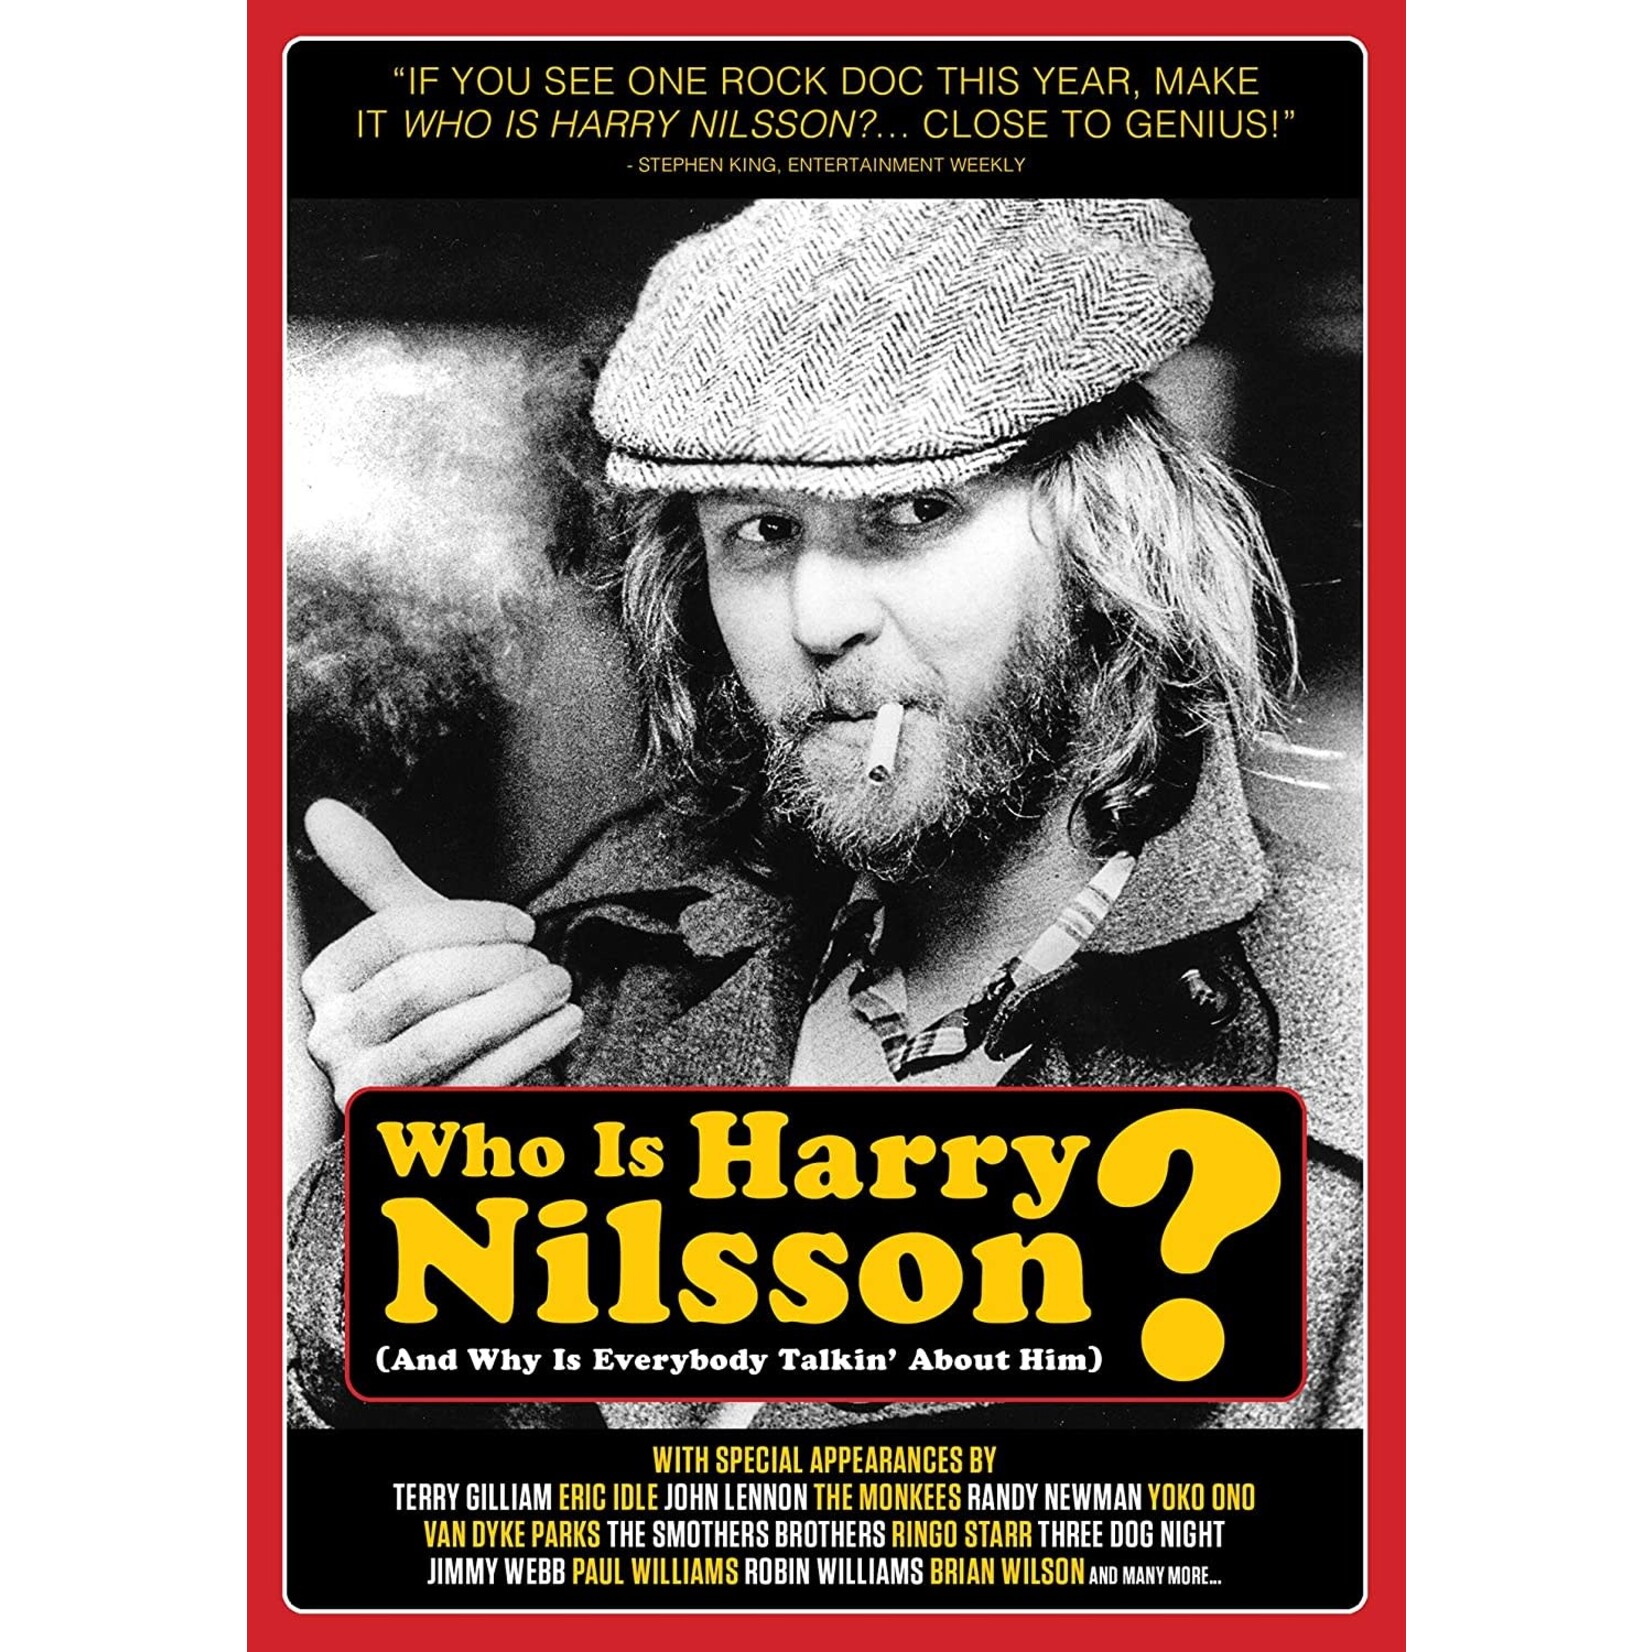 Harry Nilsson - Who Is Harry Nilsson? (And Why Is Everybody Talkin' About Him) [DVD]